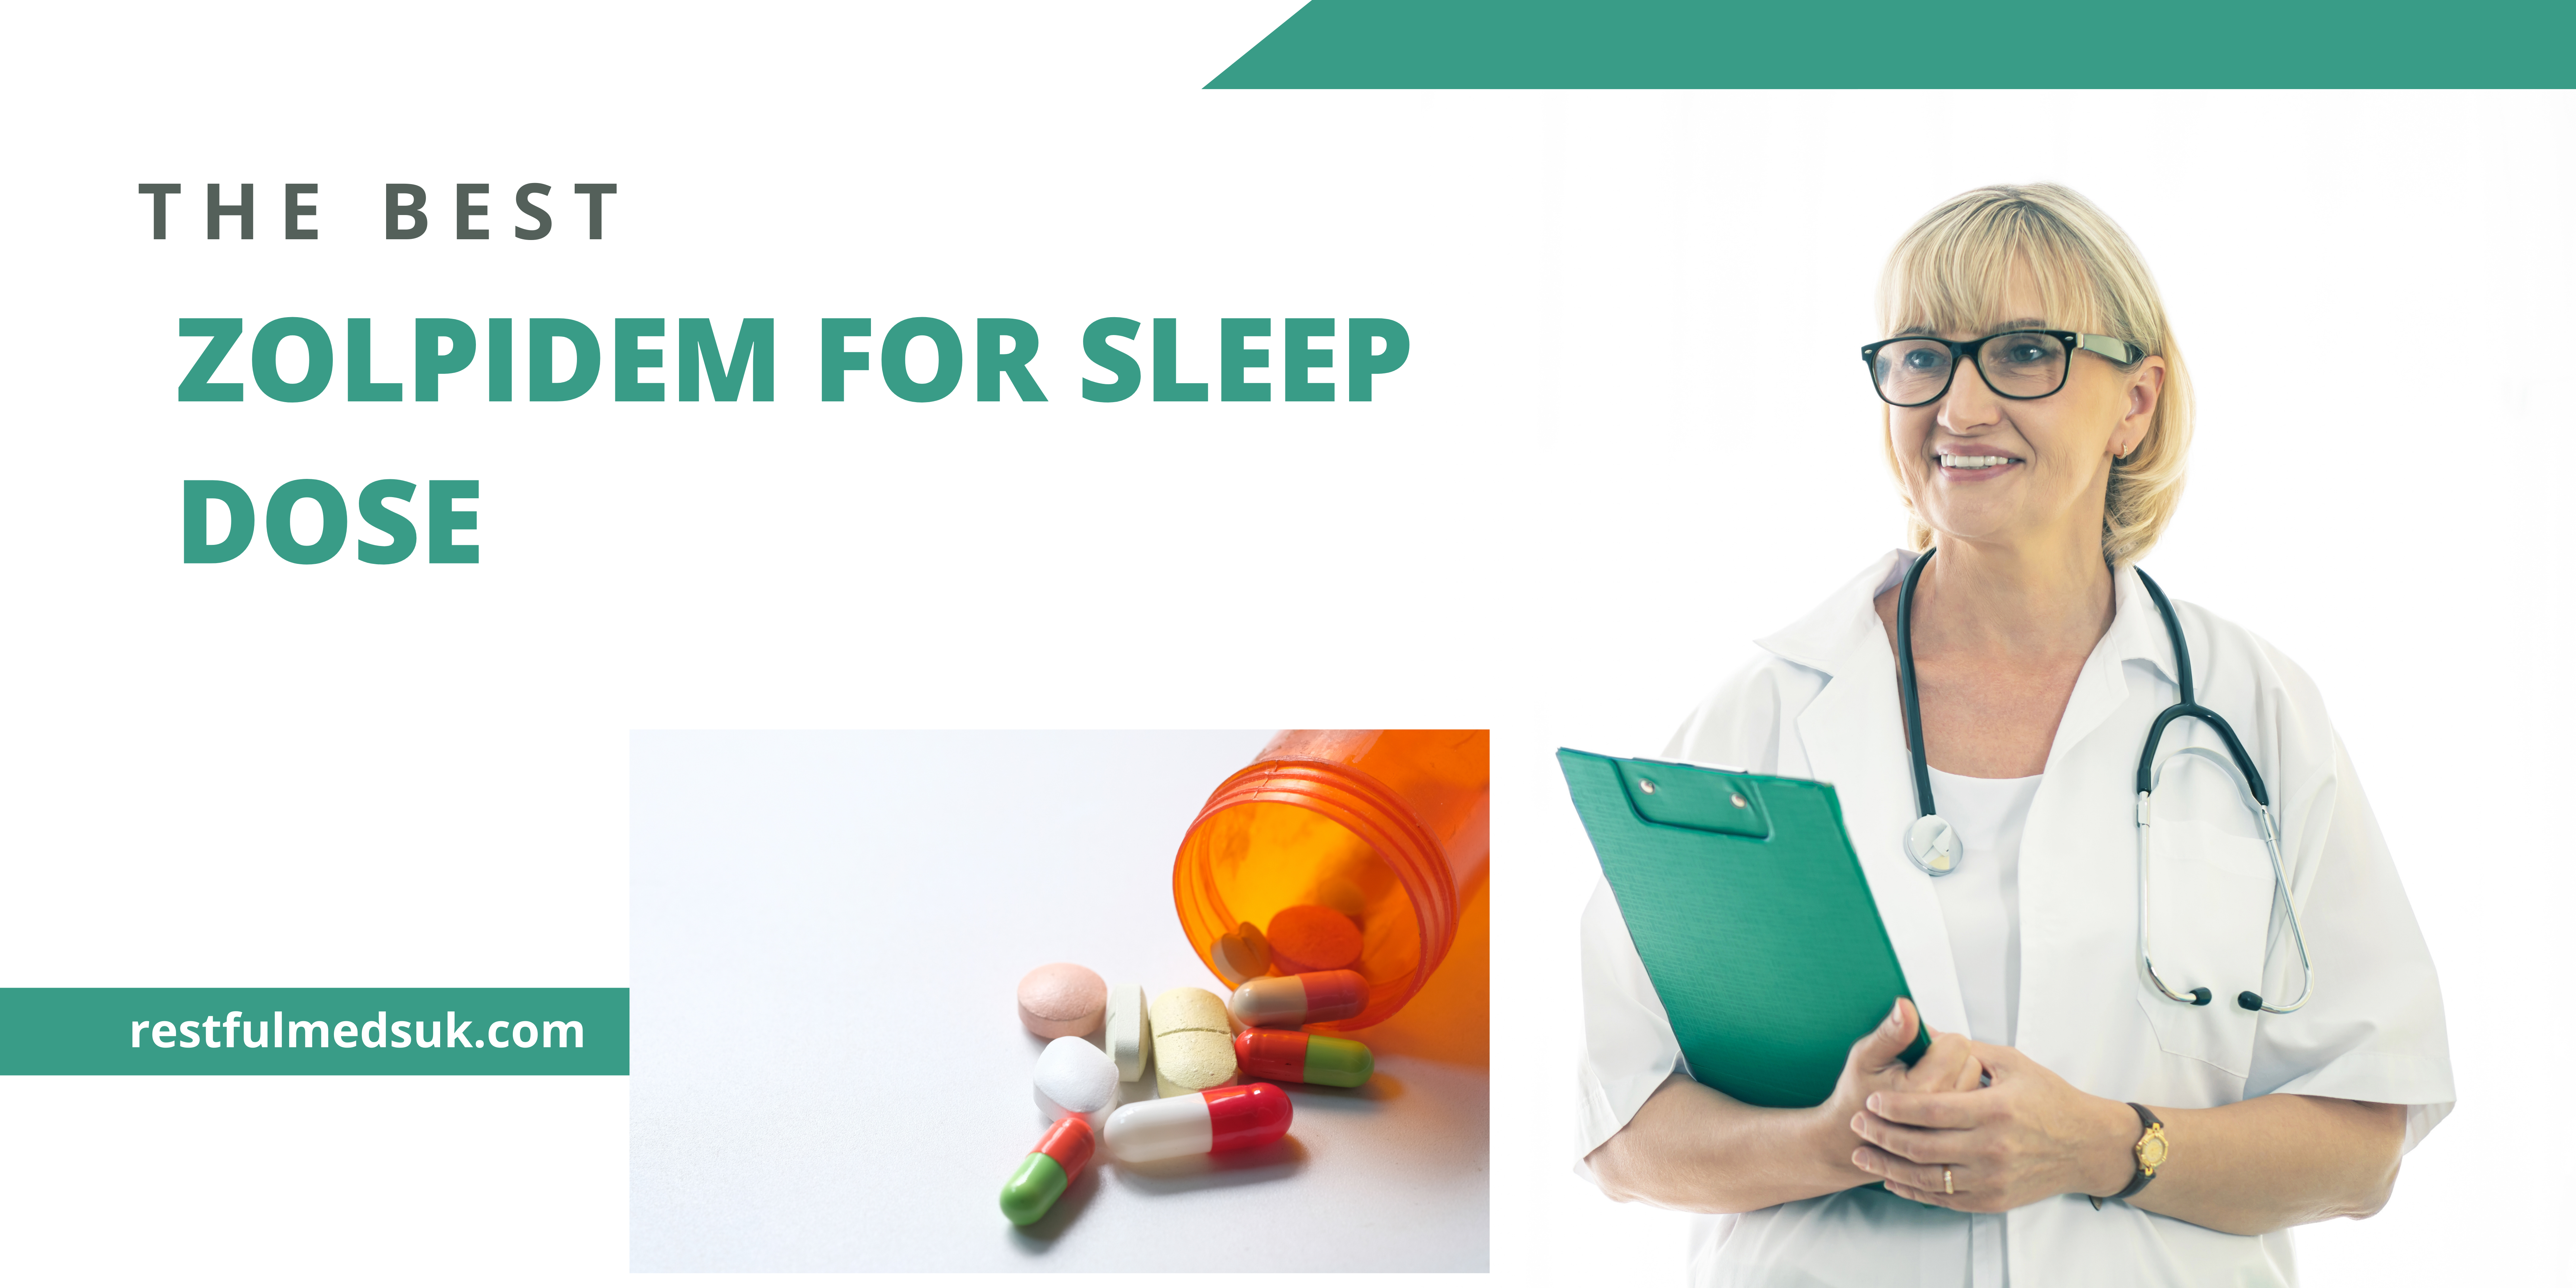 Role of Zolpidem sleeping tablets in reversing the effects of insomnia